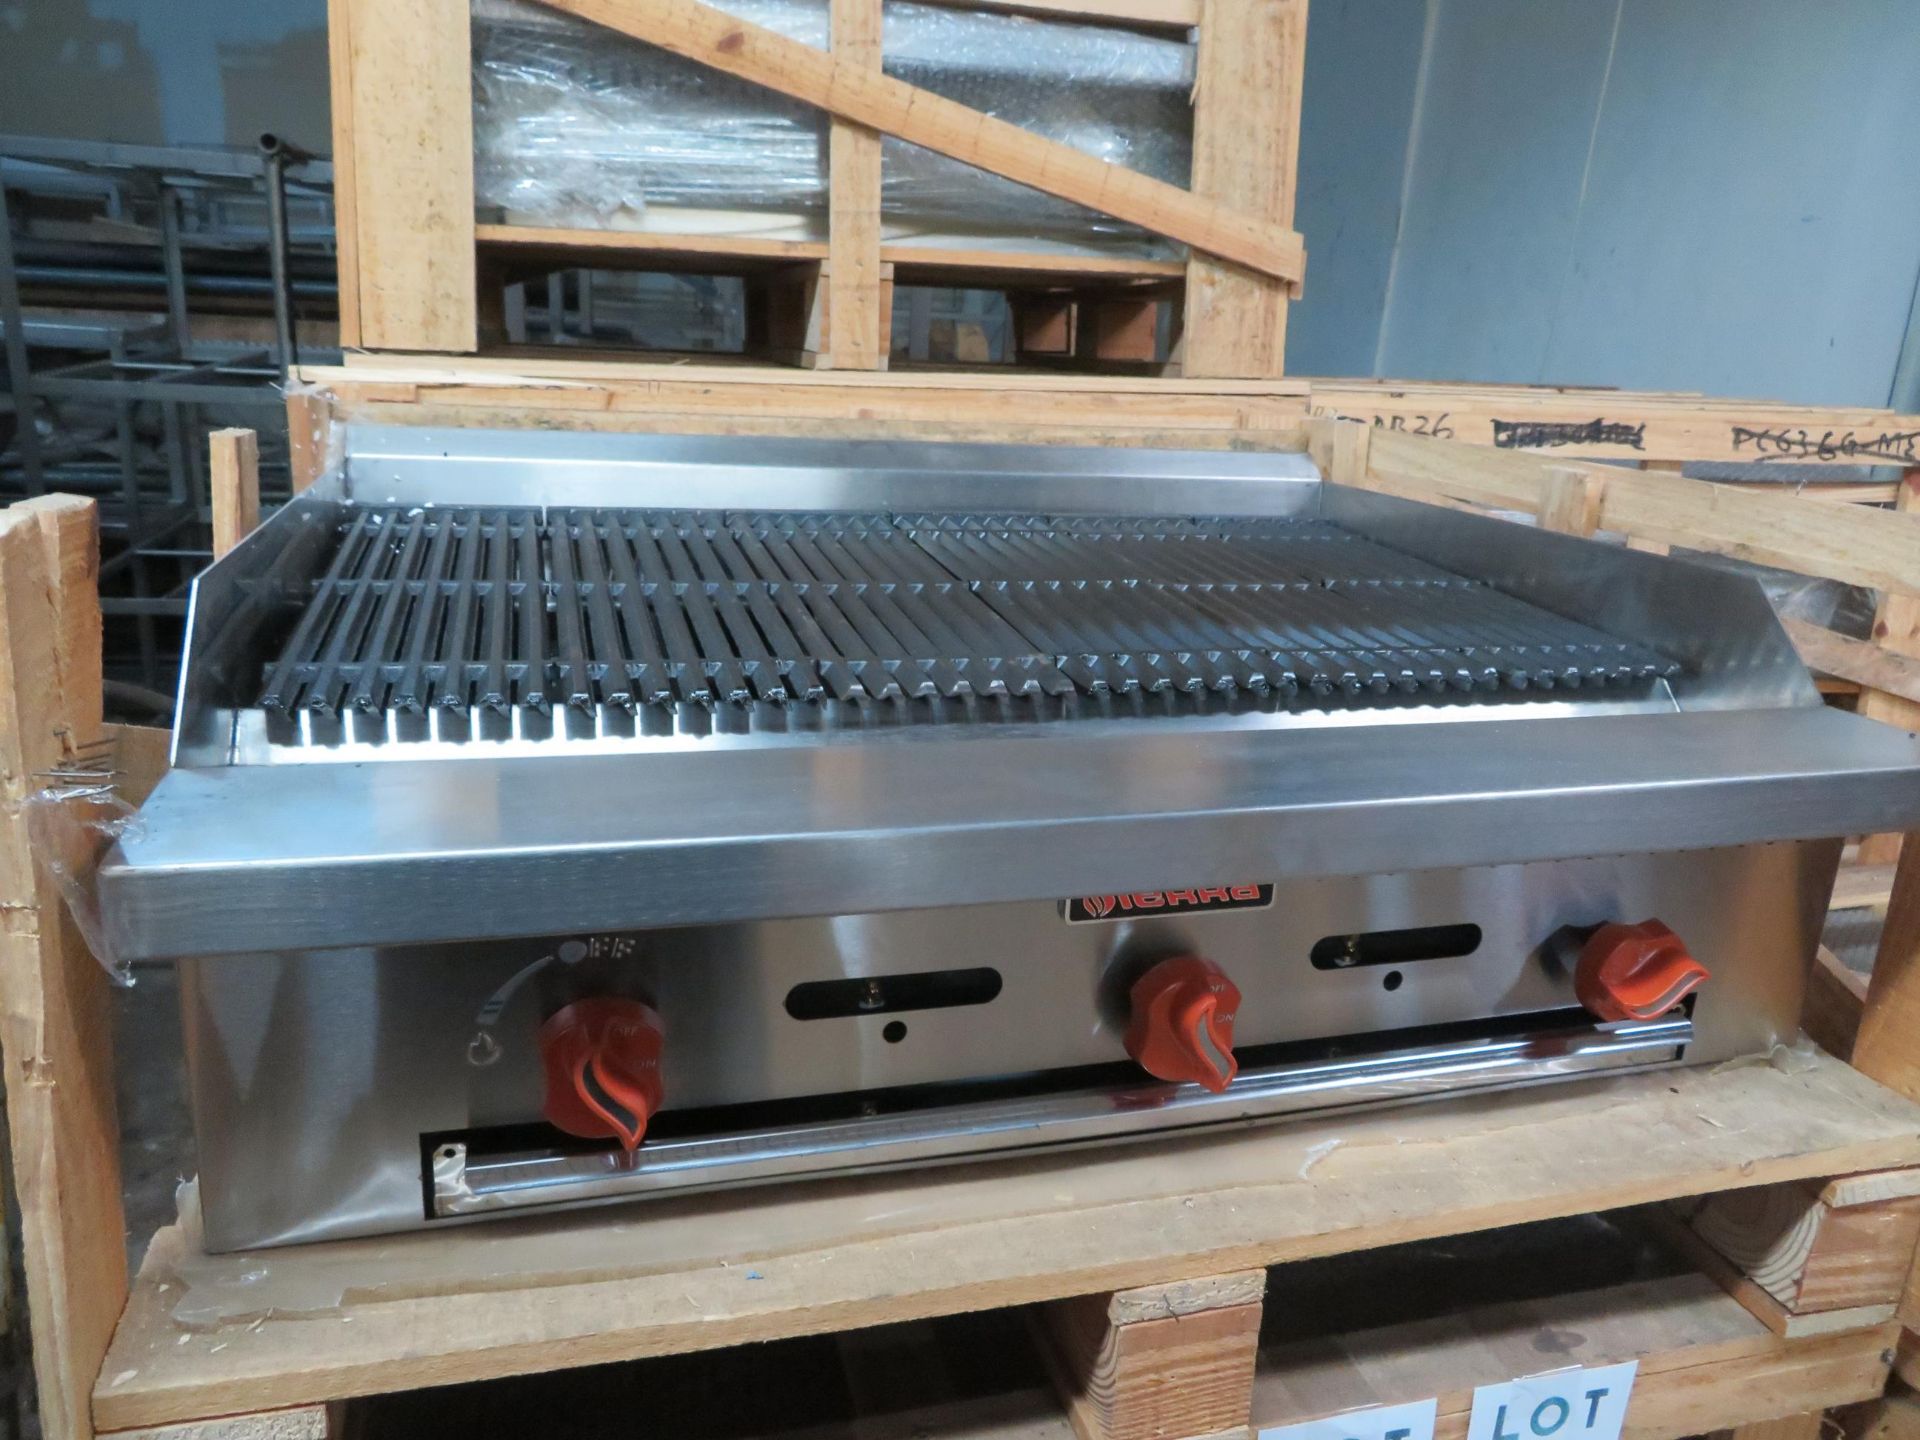 Brand New SIERRA natural gas radiant 36" broiler, Mod #SRRB-36 approx. 36"w x 30"d x 12"h - Image 2 of 2